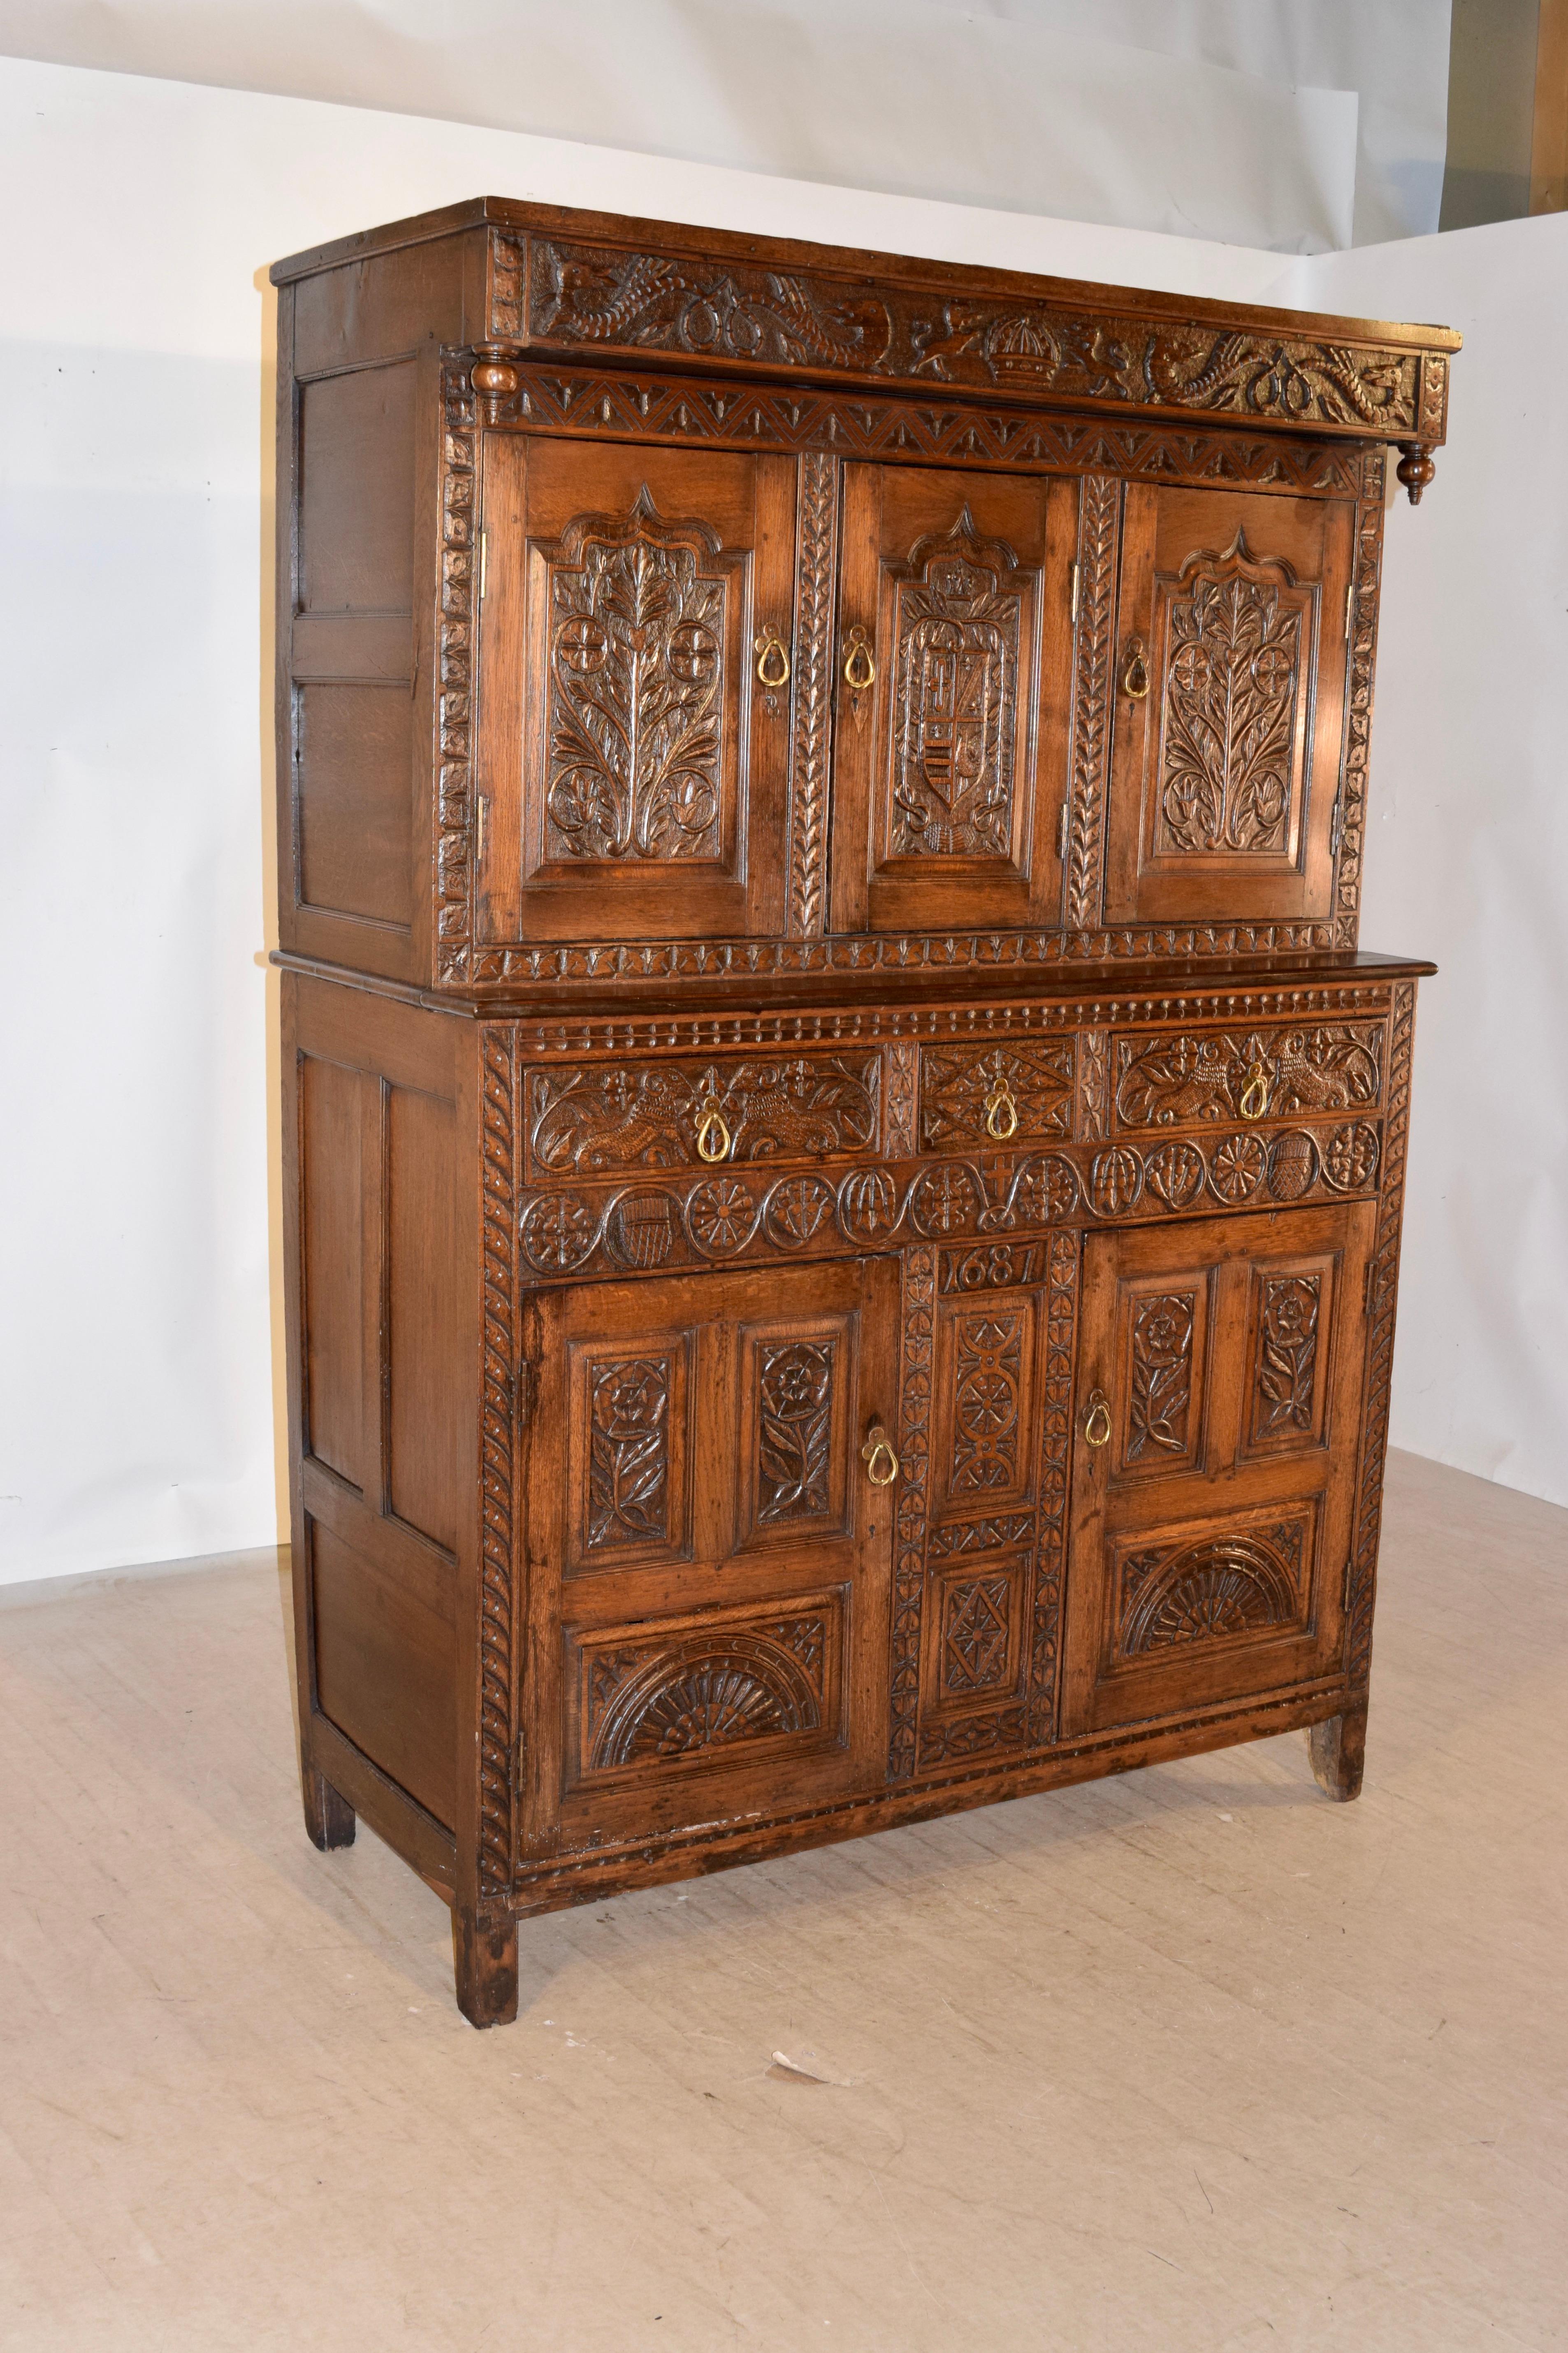 A late 17th century Charles II period carved oak court cupboard from England. The court cupboard breaks down into two sections; the upper section has a top rail boldly carved with a central crown flanked by lions and dragon motif, above a pair of